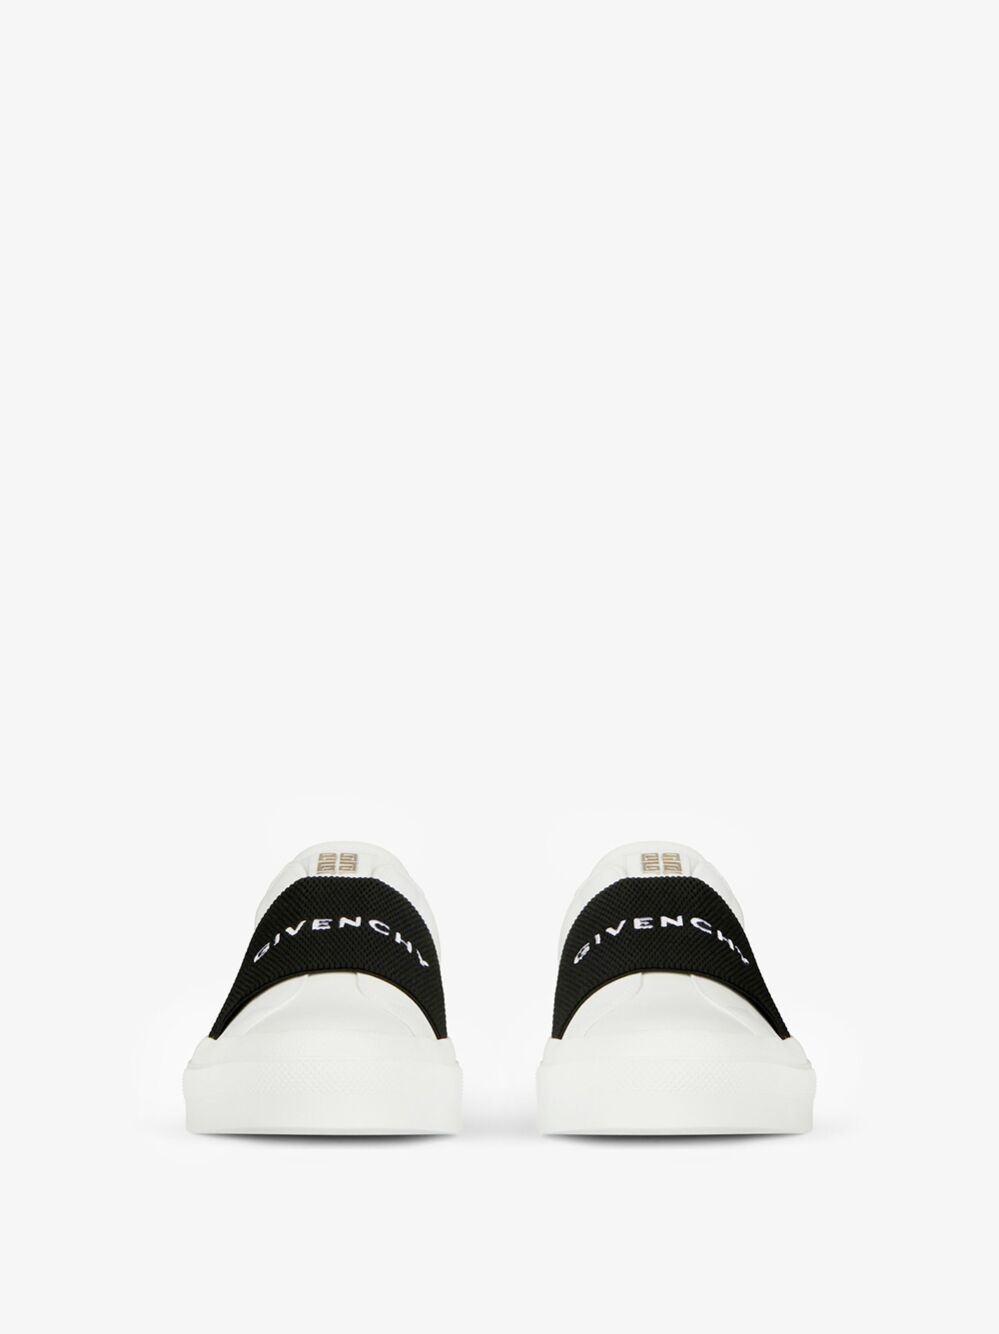 Sneakers with givenchy webbing - 2